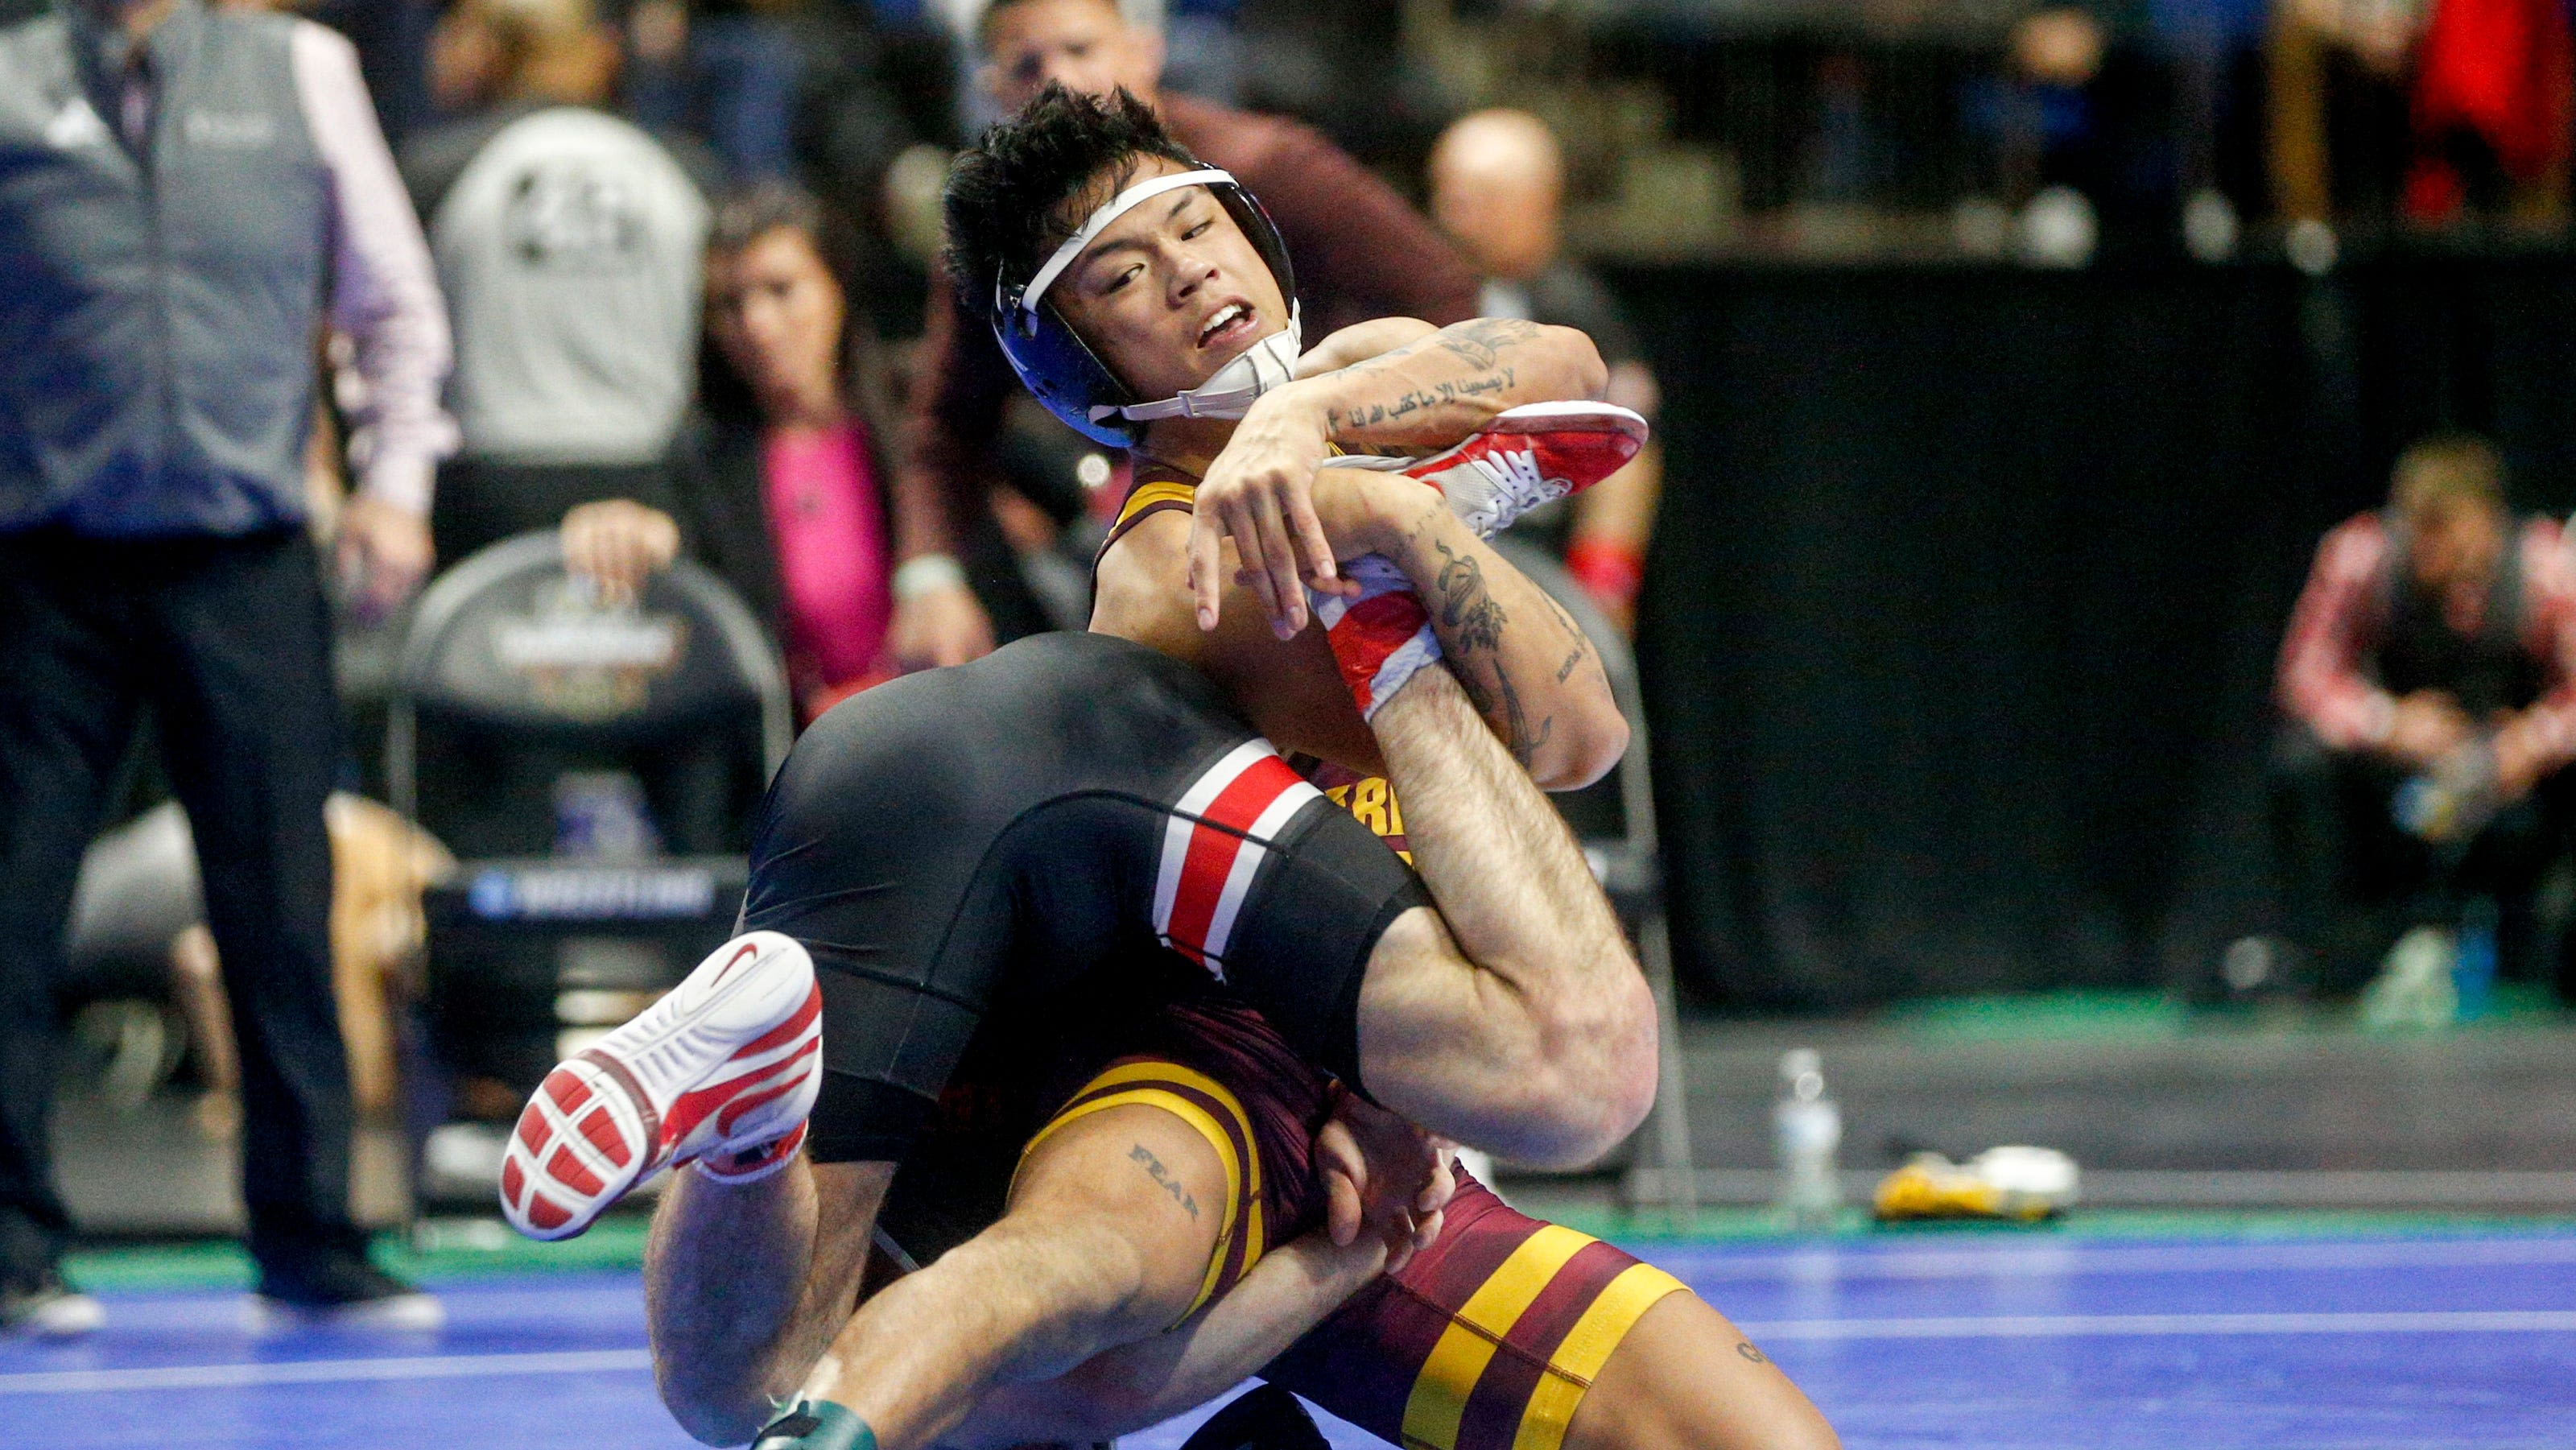 Iowa wrestling adds Arizona State transfer Kyle Parco to roster, a 4-time All-American